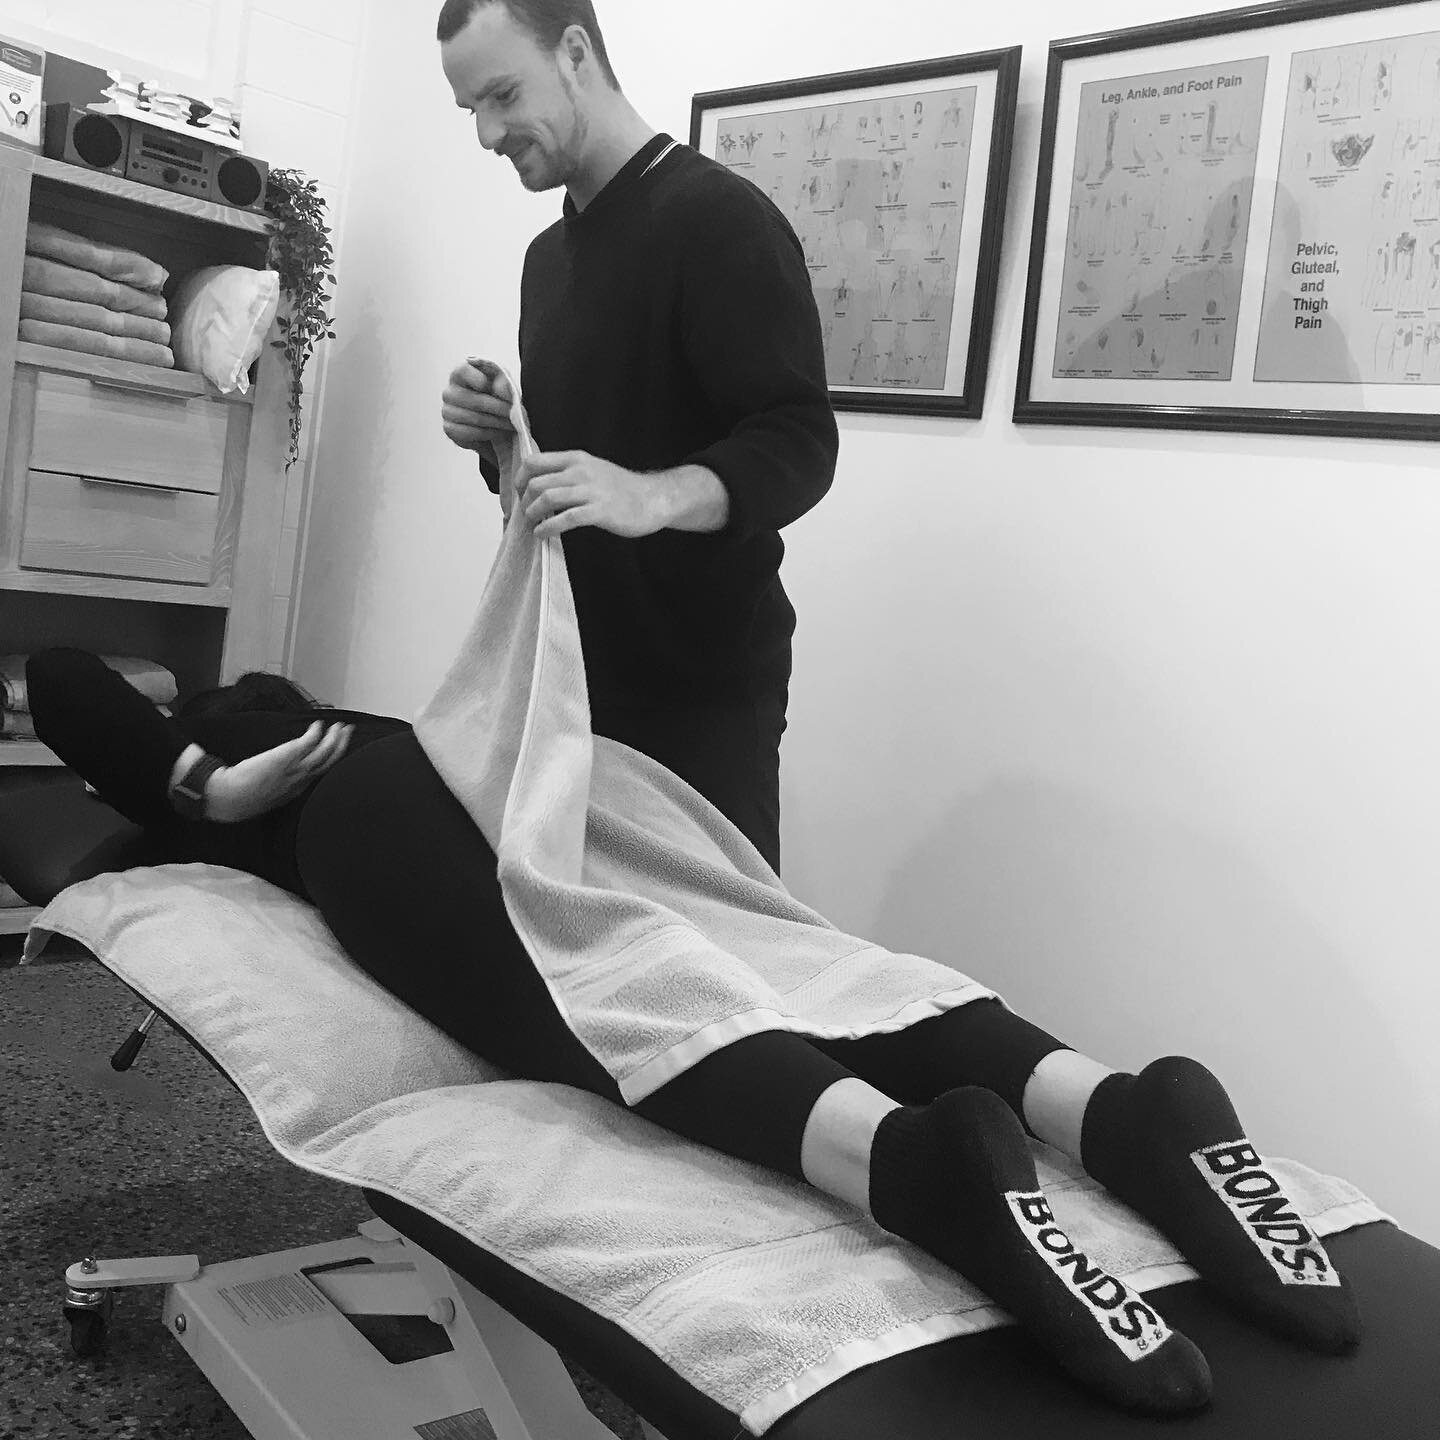 Back  pain getting you down ?
Book in with our resident Osteopath Dr Mason Webb this weekend ! Mason can design an individualised treatment plan to help get your body back to pain free movement! Don&rsquo;t forget Osteopathy treatments like all allie